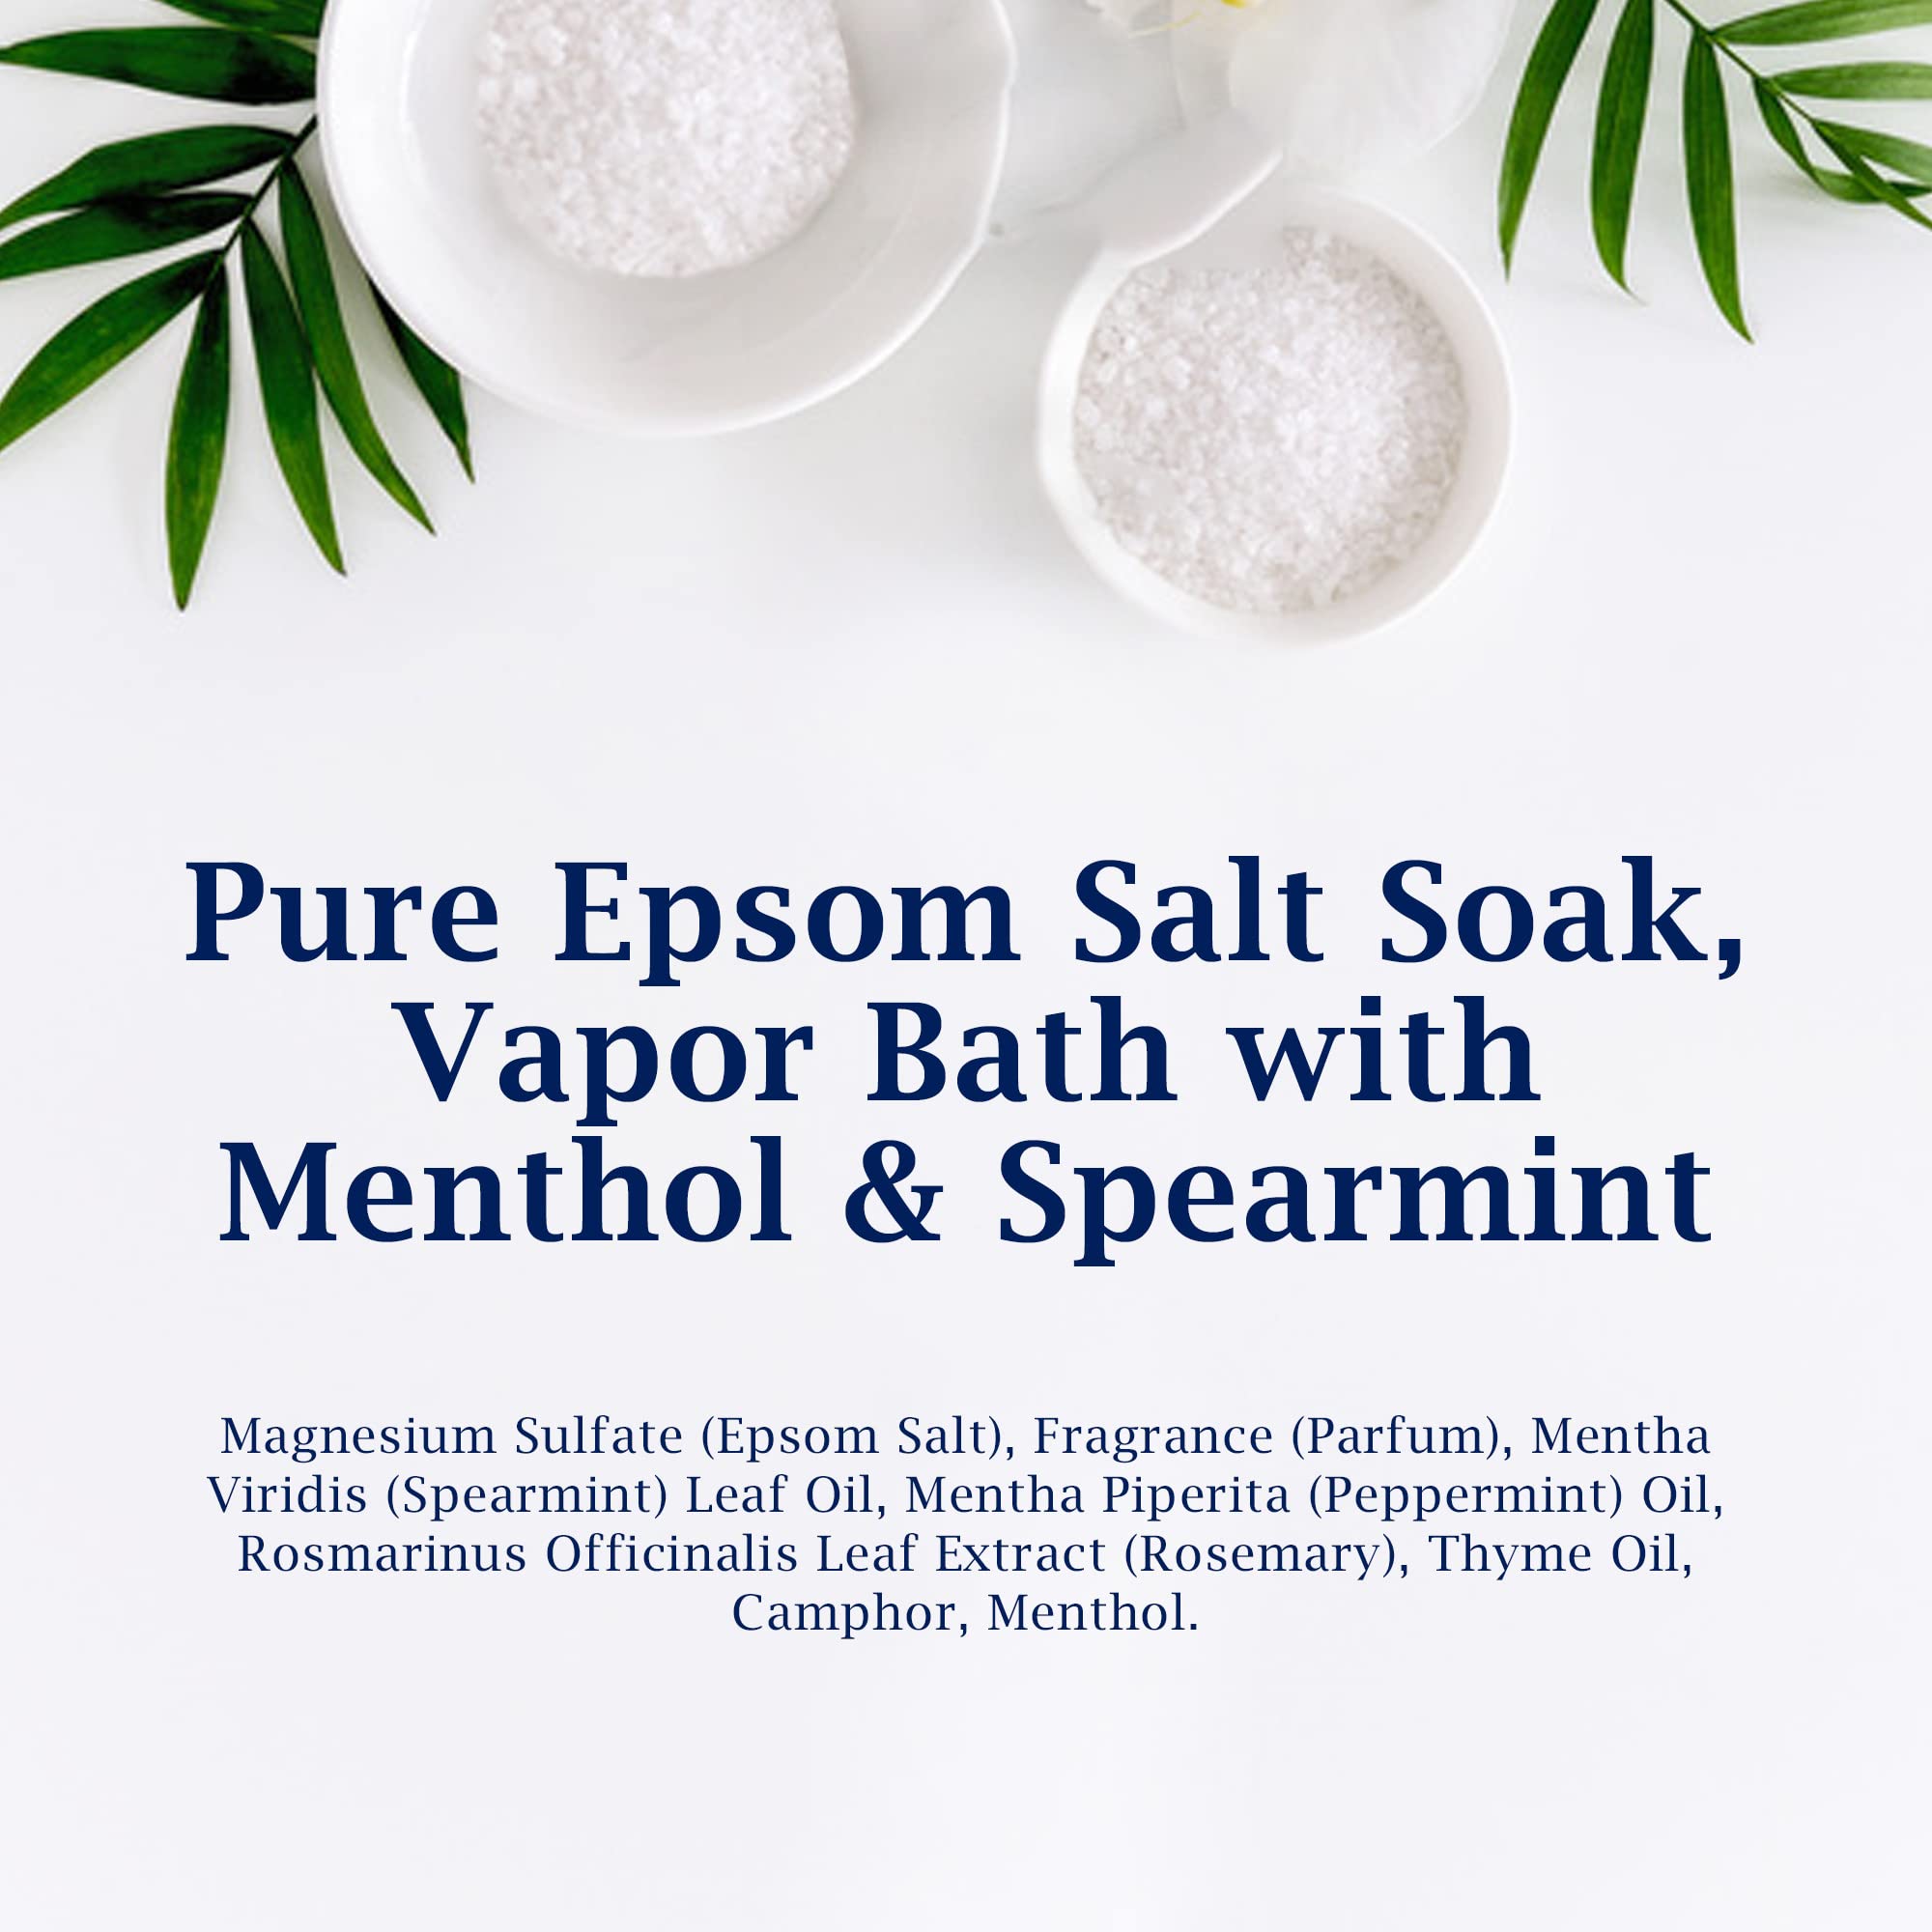 Dr Teal's Pure Epsom Salt, Vapor Bath with Menthol & Camphor, 2 lbs (Pack of 3) (Packaging May Vary)